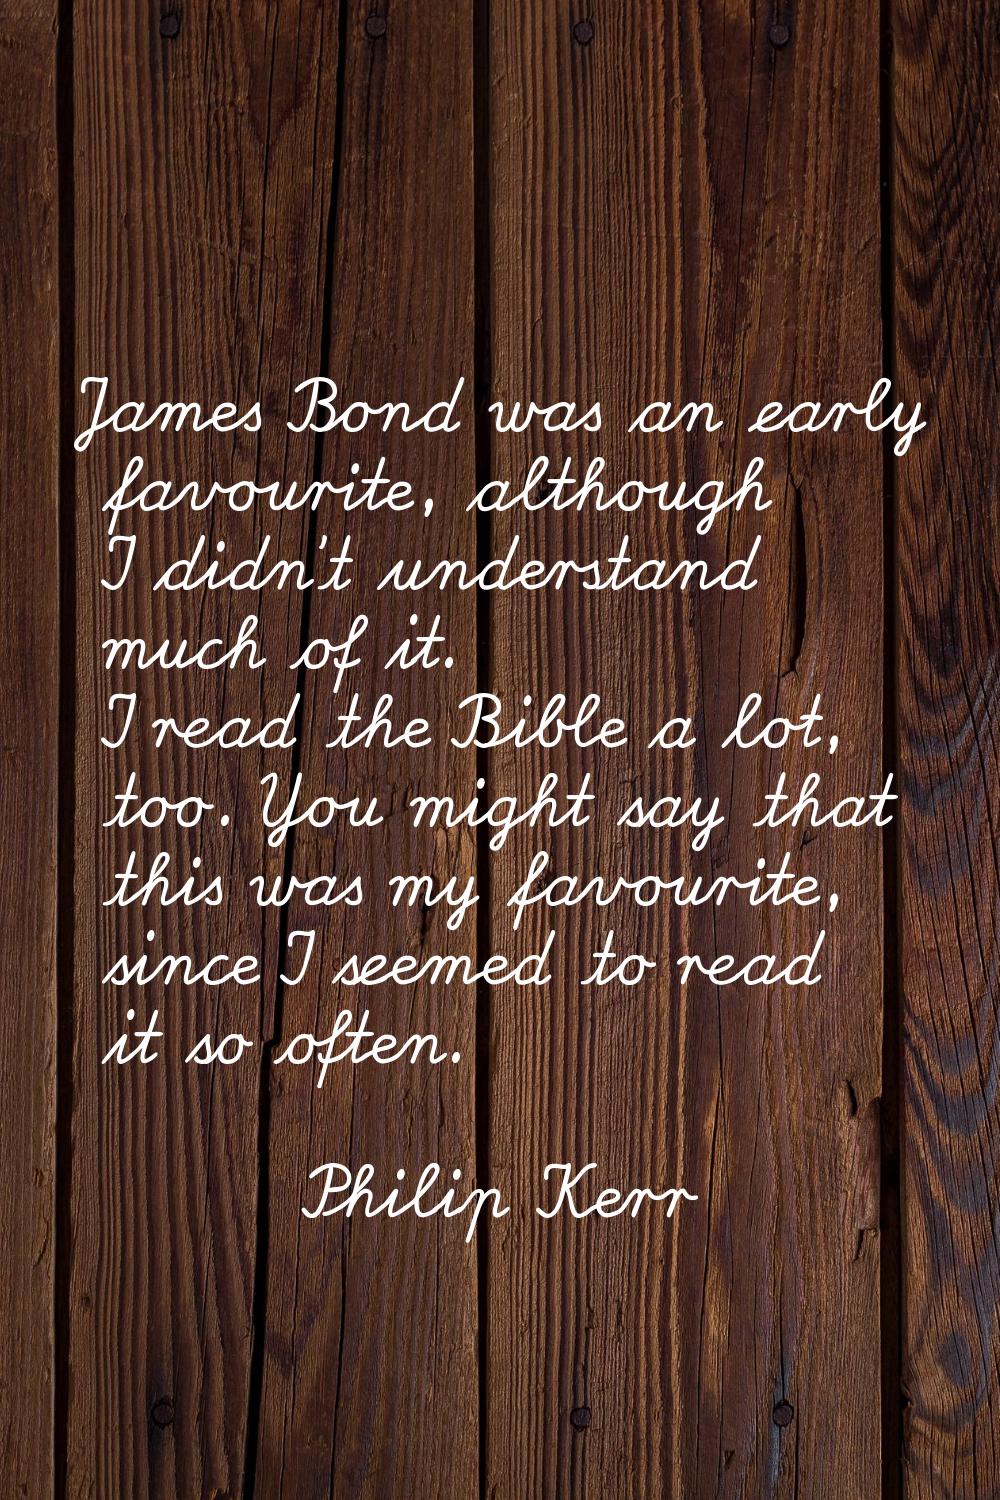 James Bond was an early favourite, although I didn't understand much of it. I read the Bible a lot,